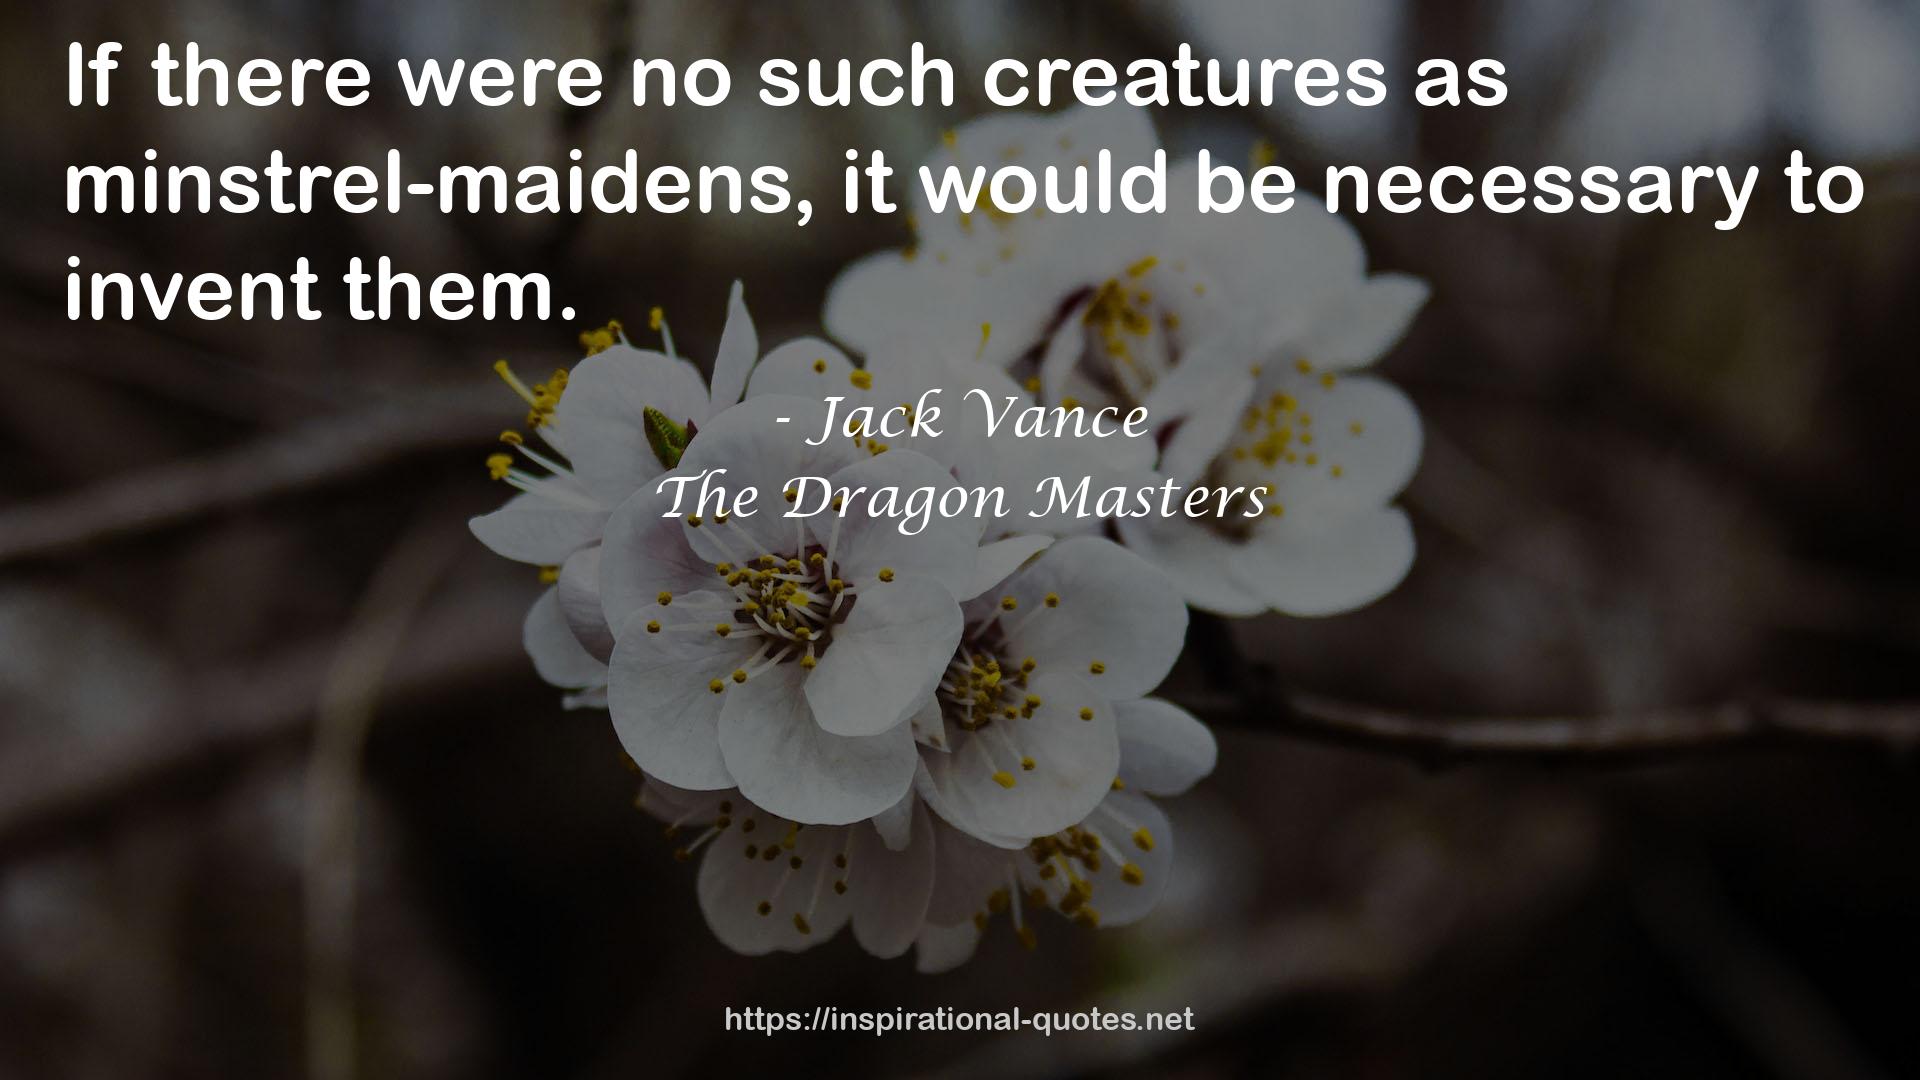 The Dragon Masters QUOTES